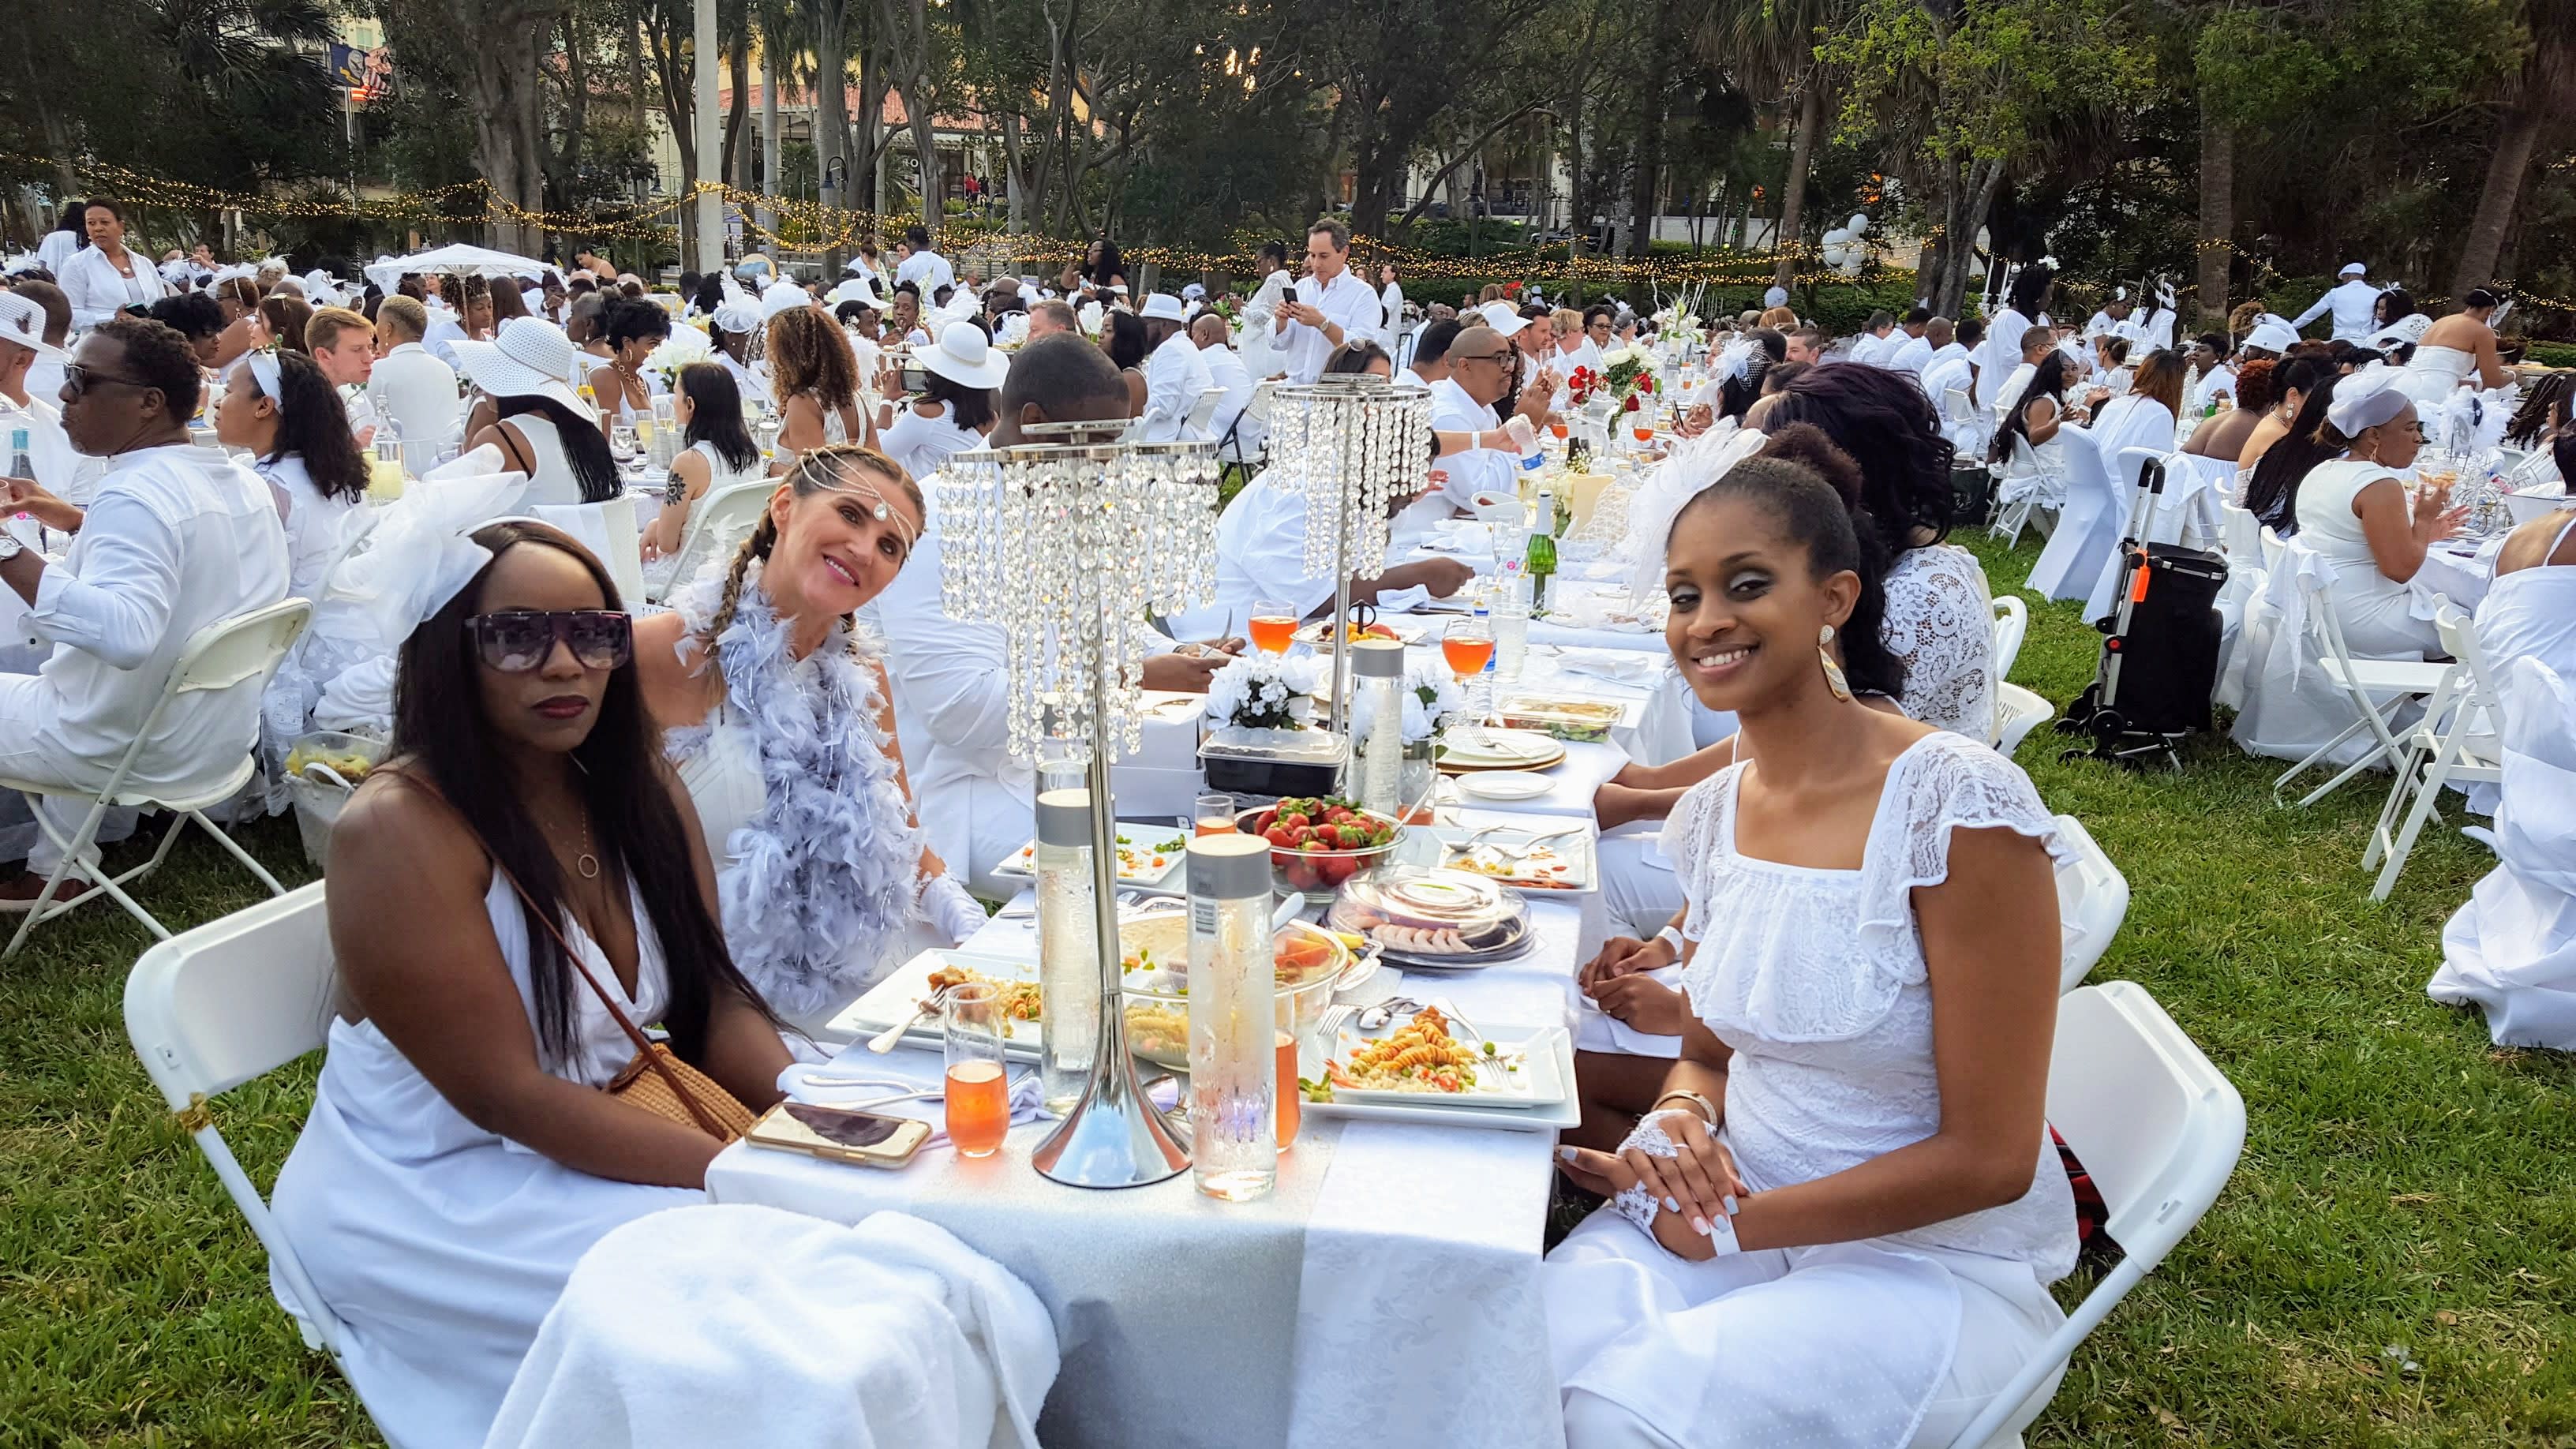 Diner en Blanc, a worldwide phenomenon that started in Paris 35 years ago, features hundreds of diners gathering for a gourmet pop-up picnic – and everyone is dressed head to toe in white. 